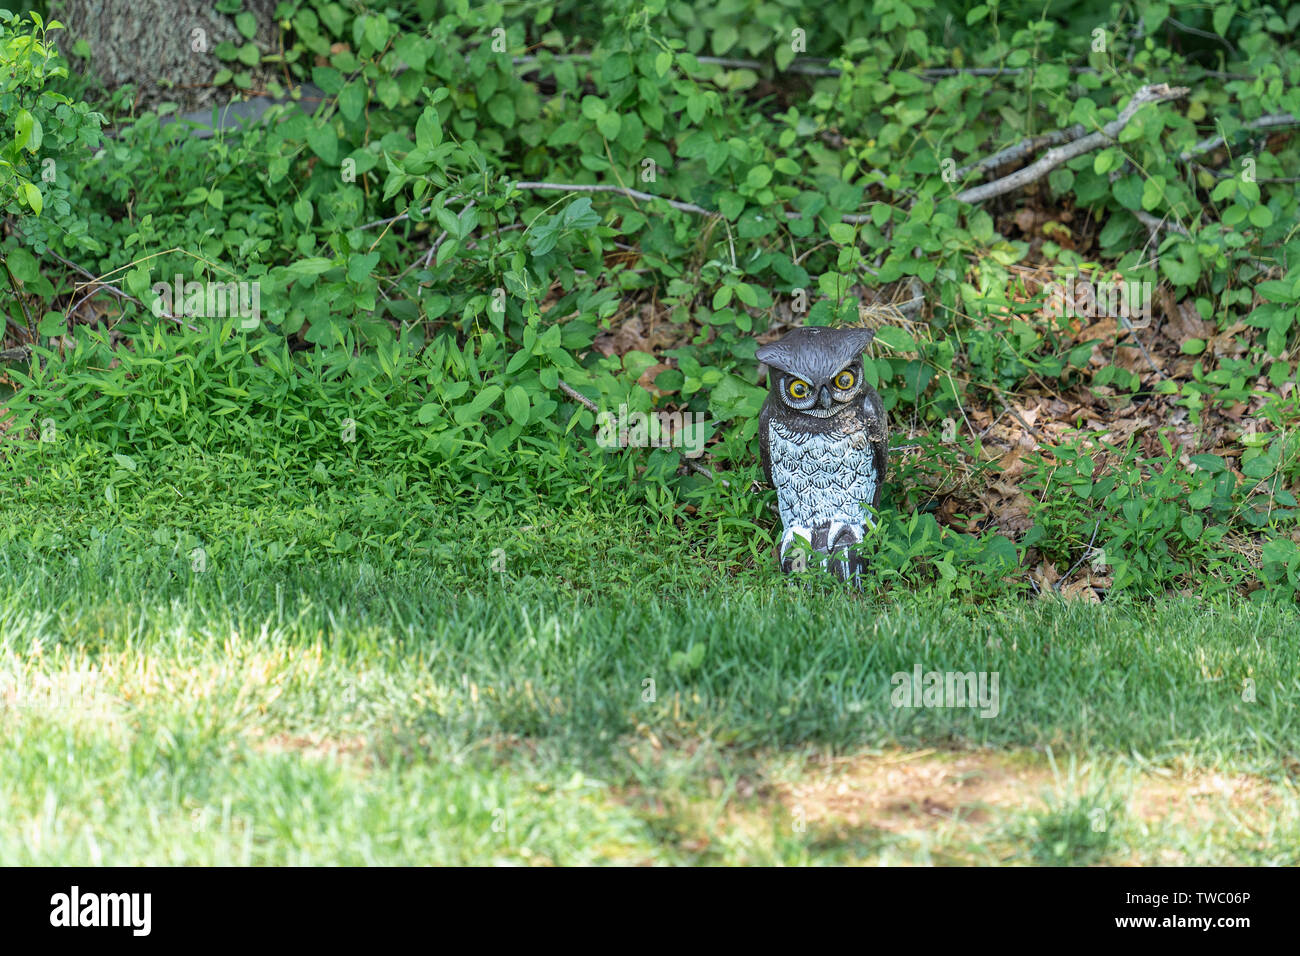 fake plastic owl decoy keeping watch at the edge of the woods meant to scare birds away Stock Photo